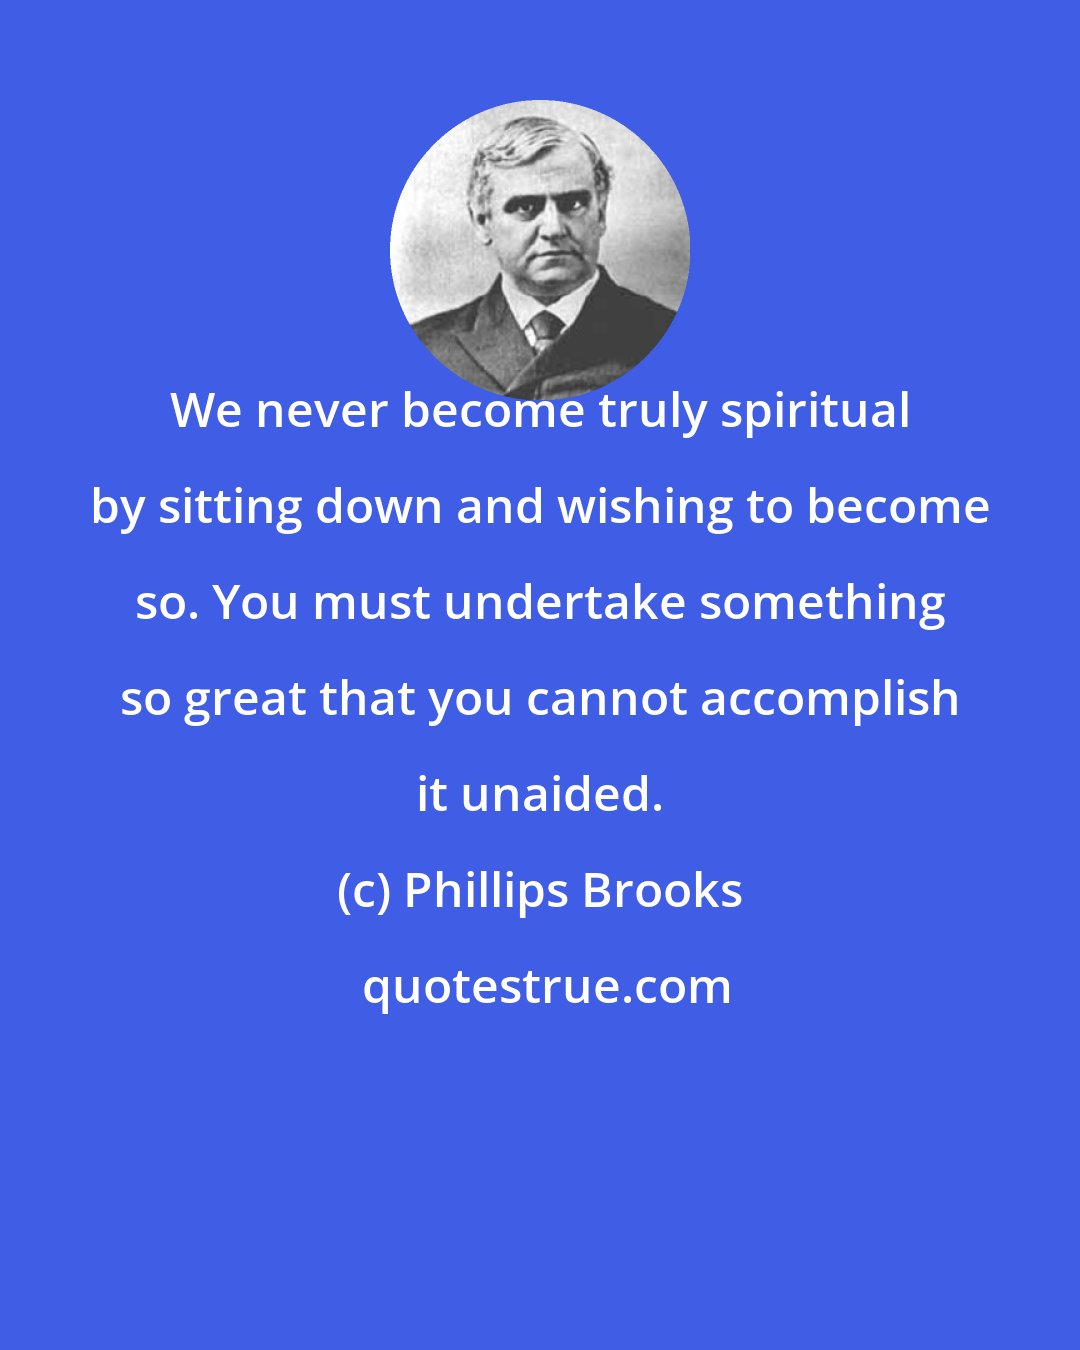 Phillips Brooks: We never become truly spiritual by sitting down and wishing to become so. You must undertake something so great that you cannot accomplish it unaided.